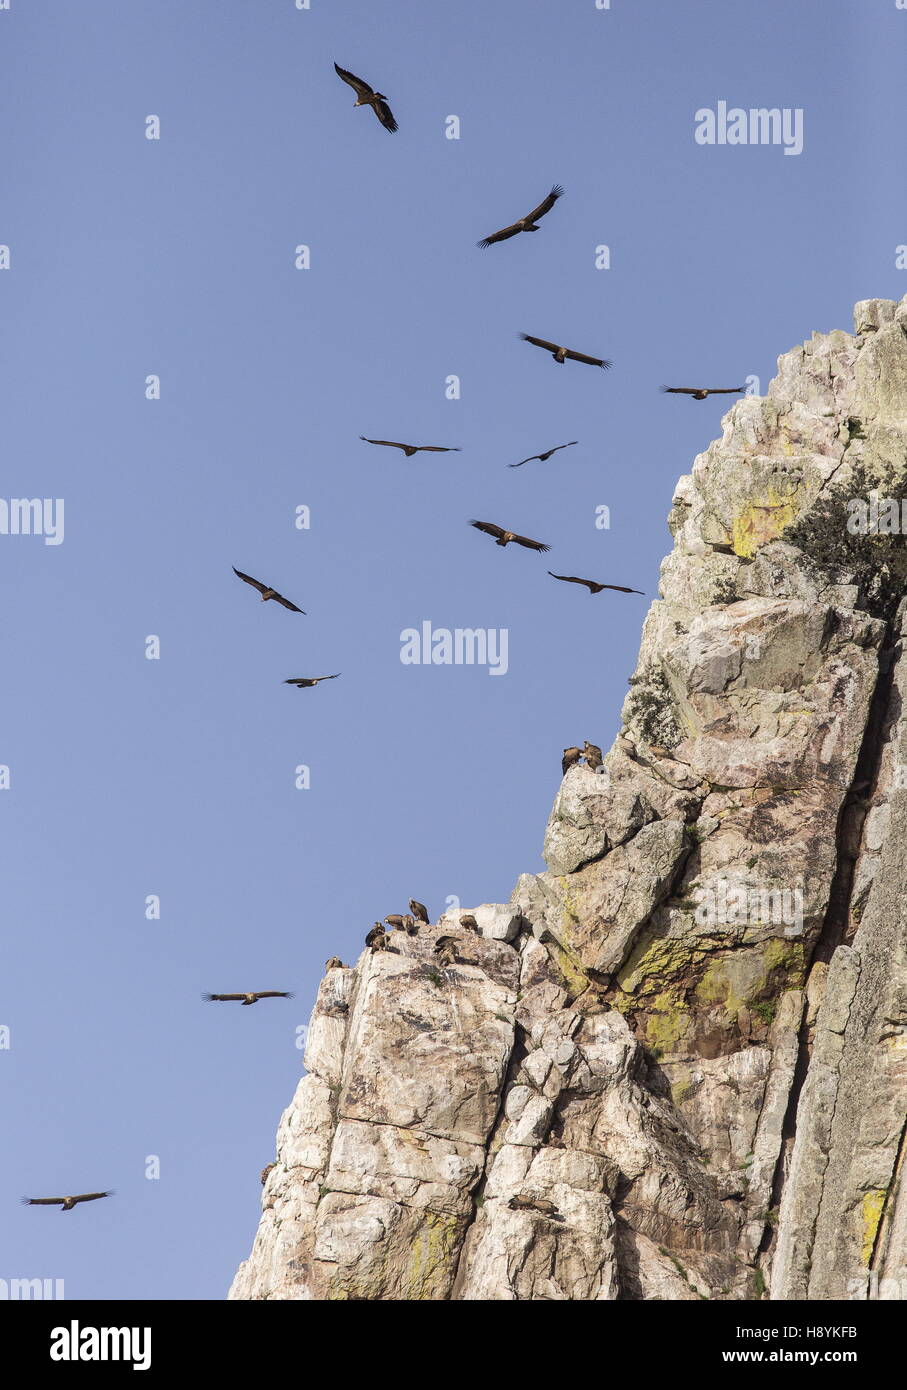 Griffon vultures, in flight at Penafalcon cliff, Monfrague, Extremadura, Spain. Stock Photo